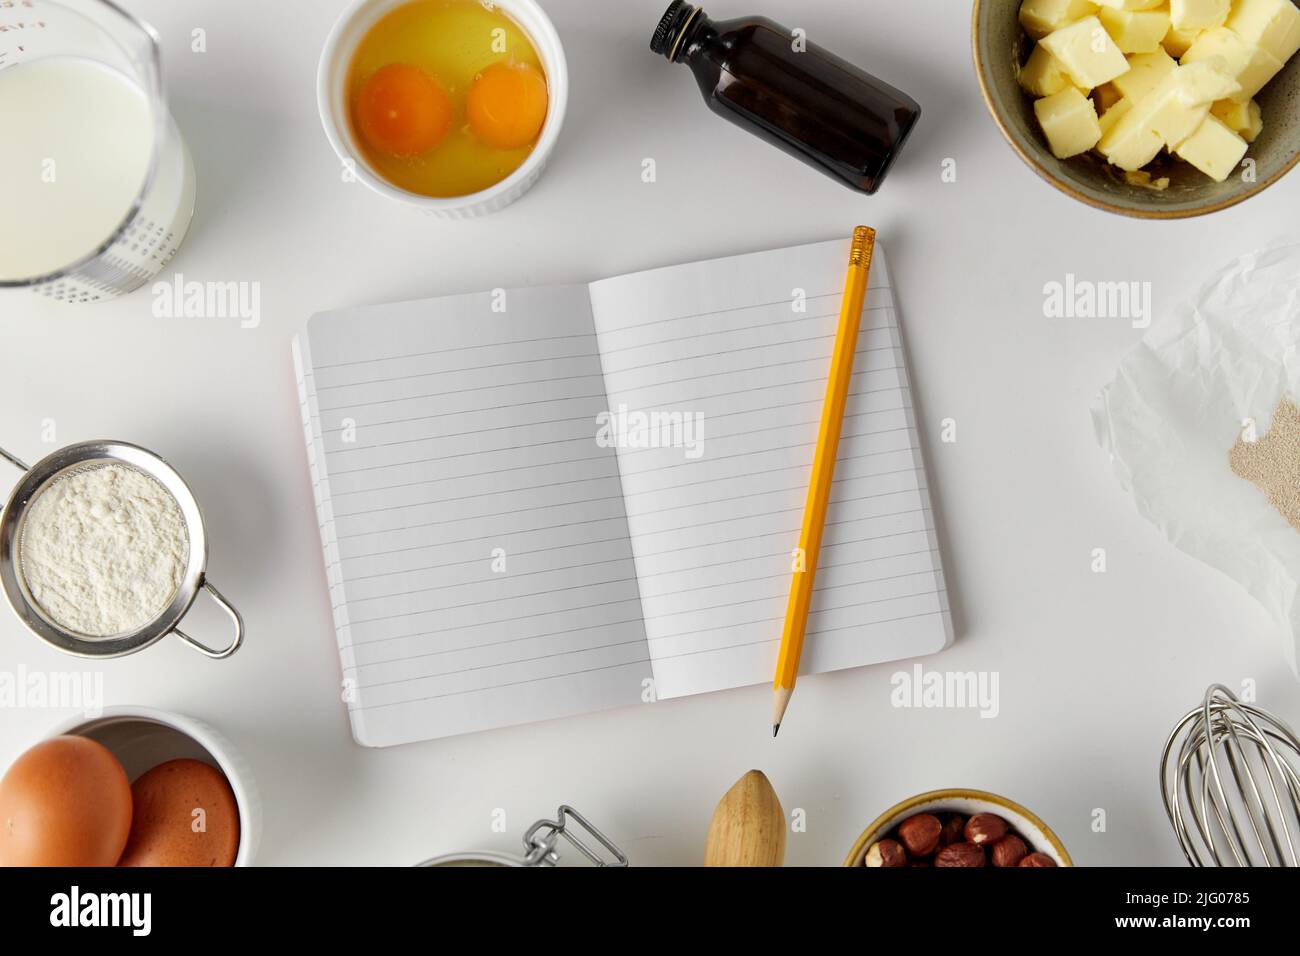 recipe book and cooking ingredients on table Stock Photo